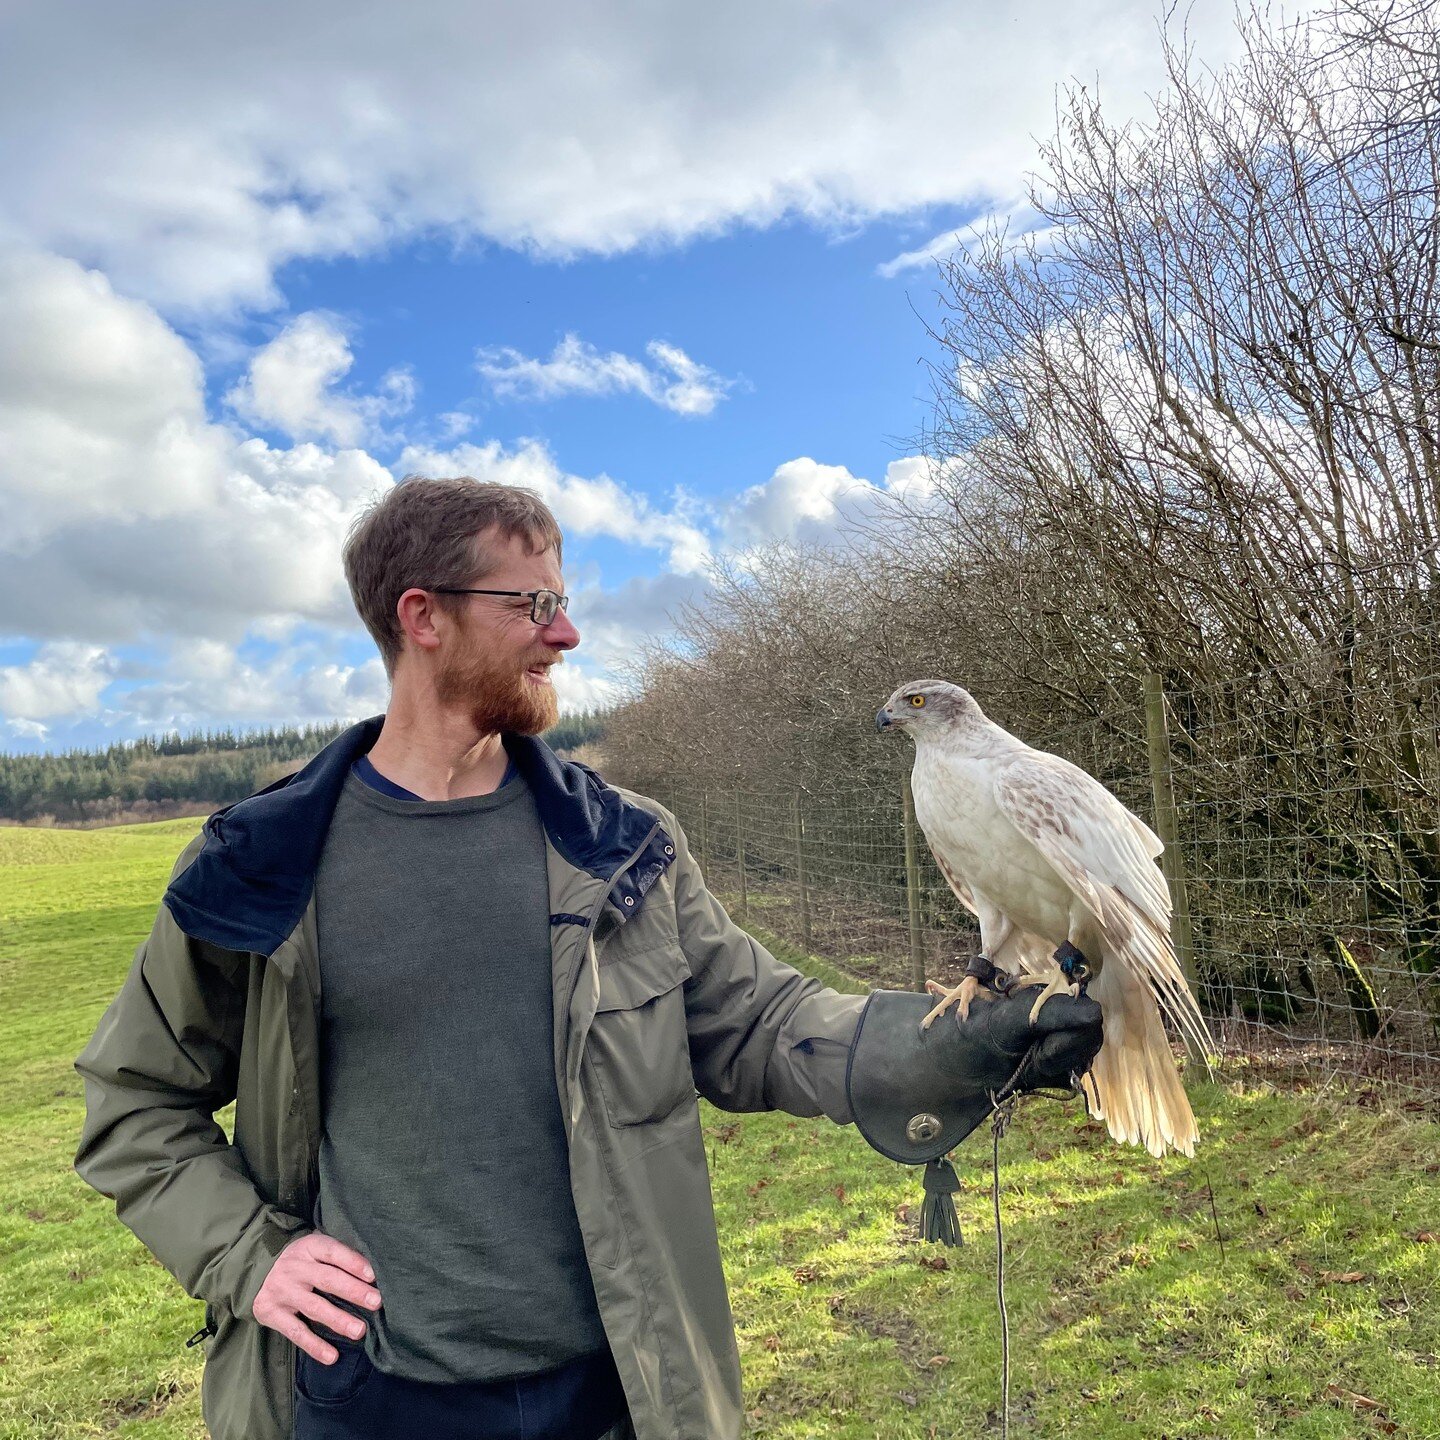 It&rsquo;s not every day you meet a goshawk on a site visit !
Our Peter Smith got up close to this amazing bird yesterday, whilst touring a potential site for three luxury holiday cabins in a secret location in the Scottish hills. #goshawk #scotland 